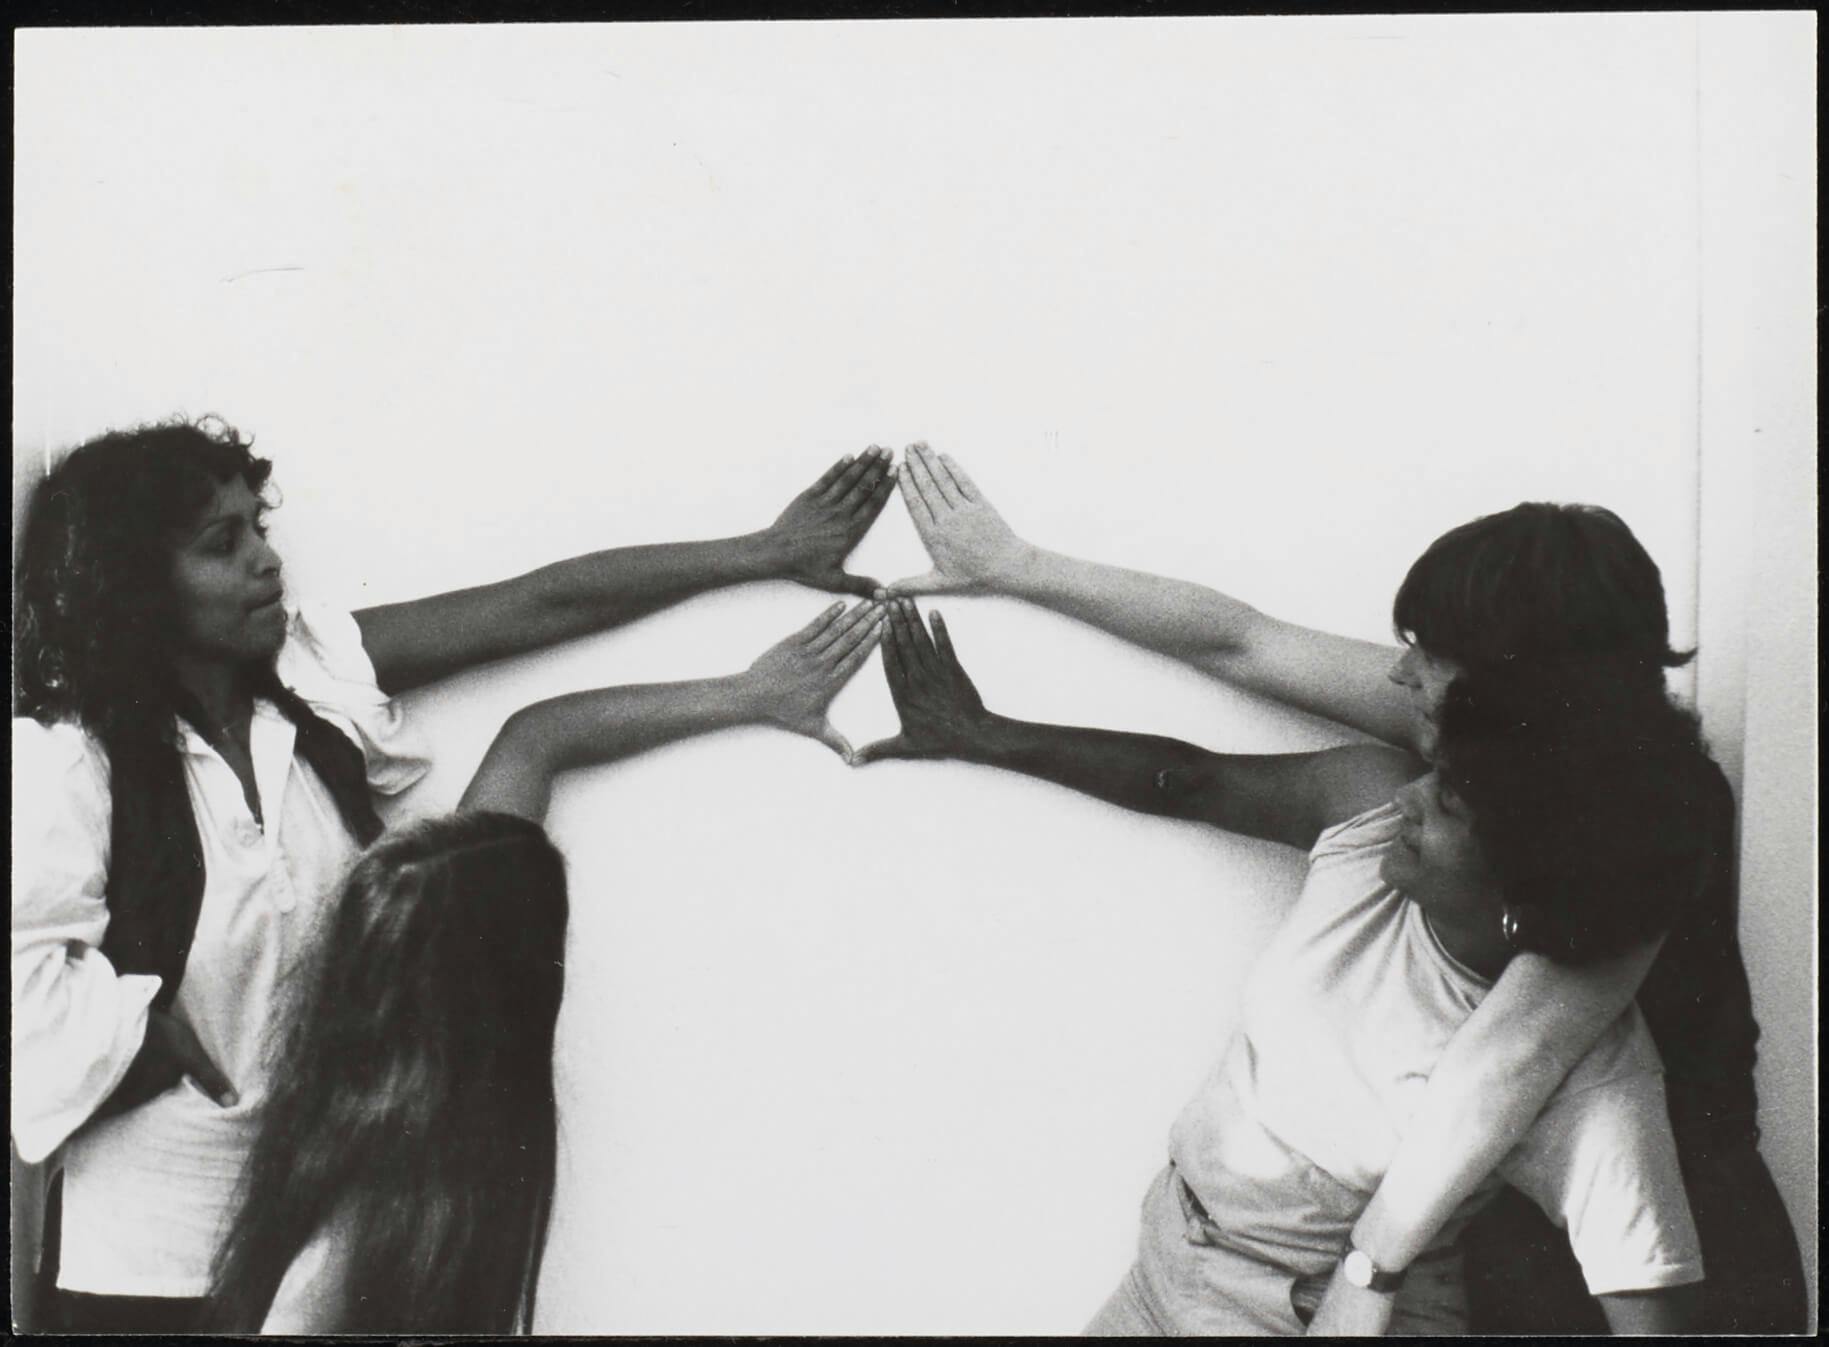 Four women forming triangles, or the Yoni sign, with their hands against a white wall, counter clockwise from bottom right: Tania Leon, Lida van den Broek, Ananda Spies, Margrethe Rumeser, year: 198?, photo: Gon Buurman. Source: Collection… 